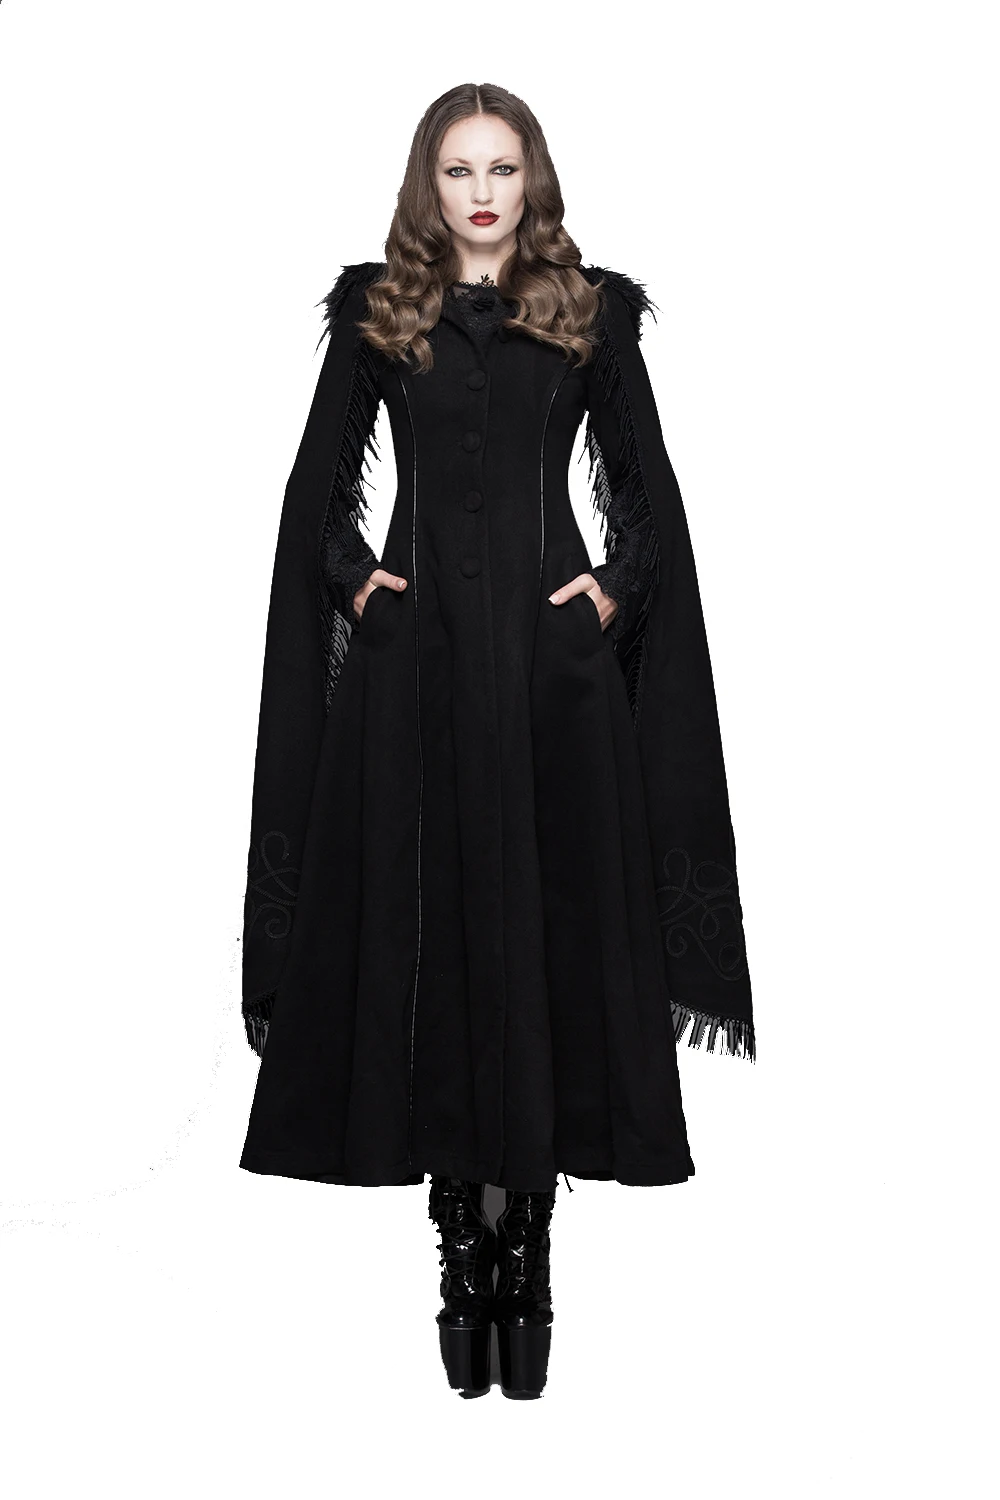 Devil Fashion Gothic Womens Hooded Coats Punk Halloween Ladies Long Maxi Red Cloack Coat